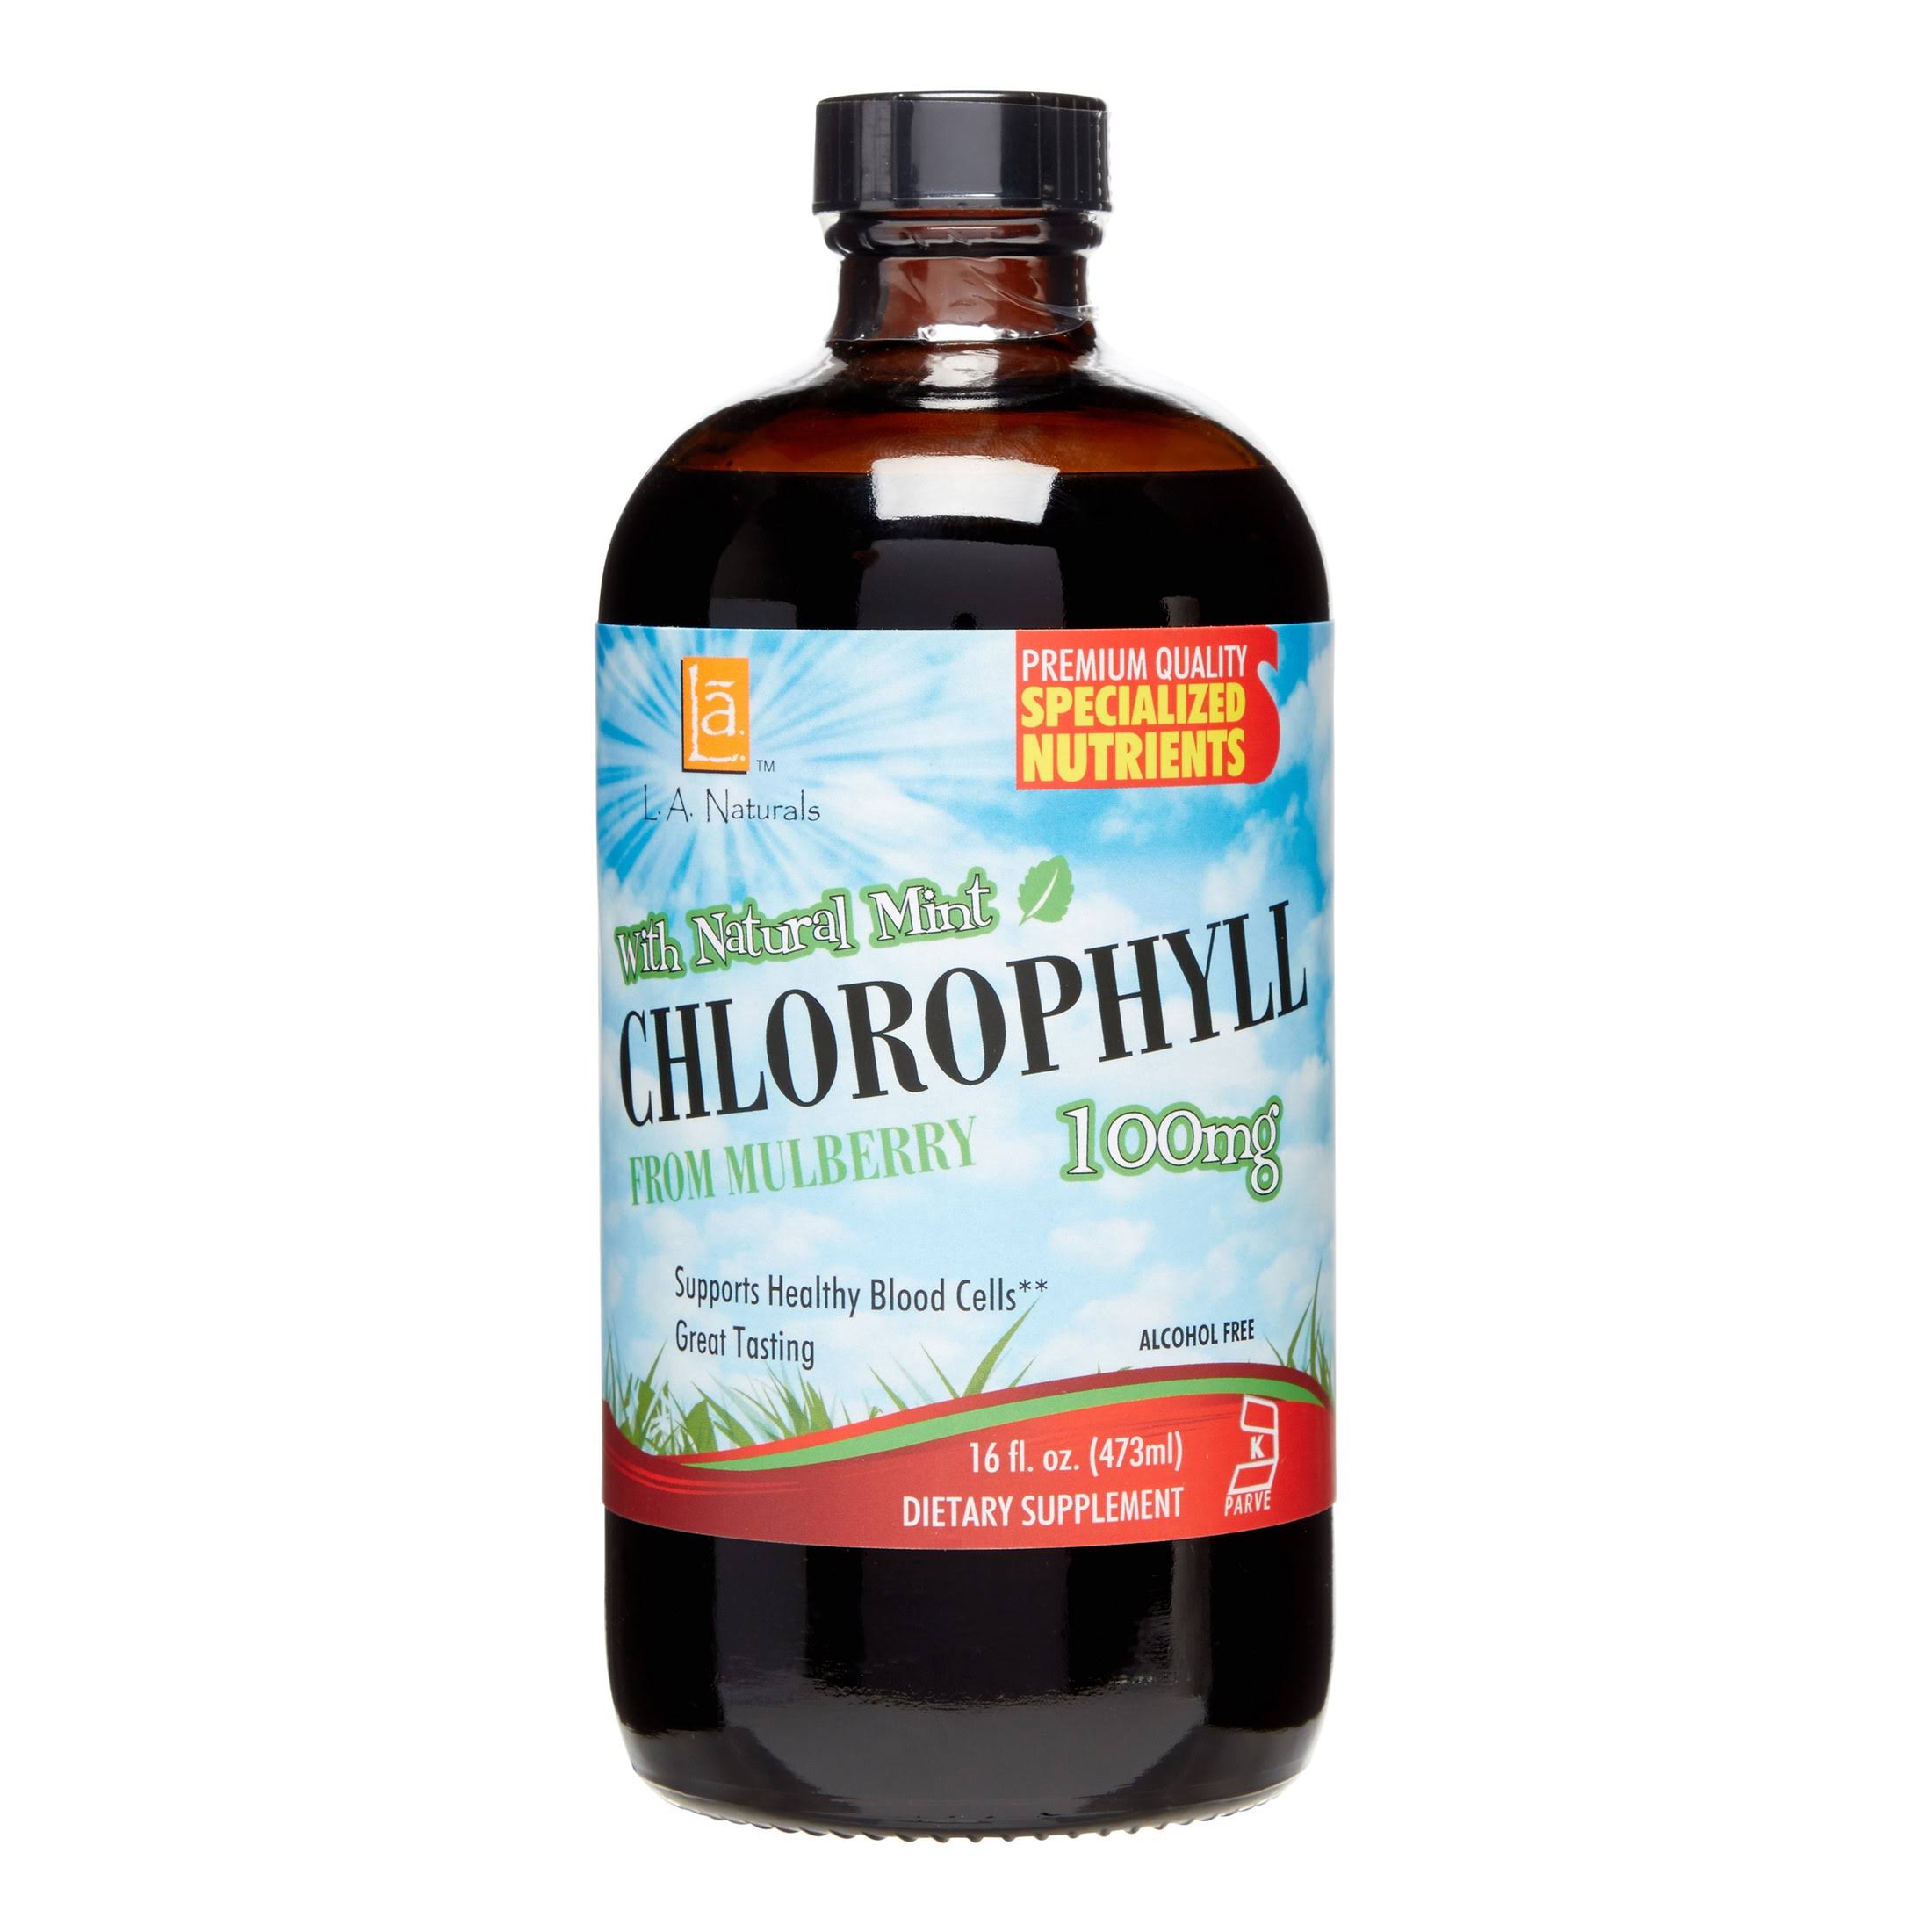 L A Naturals Chlorophyll With Spearmint Supplement - 16oz